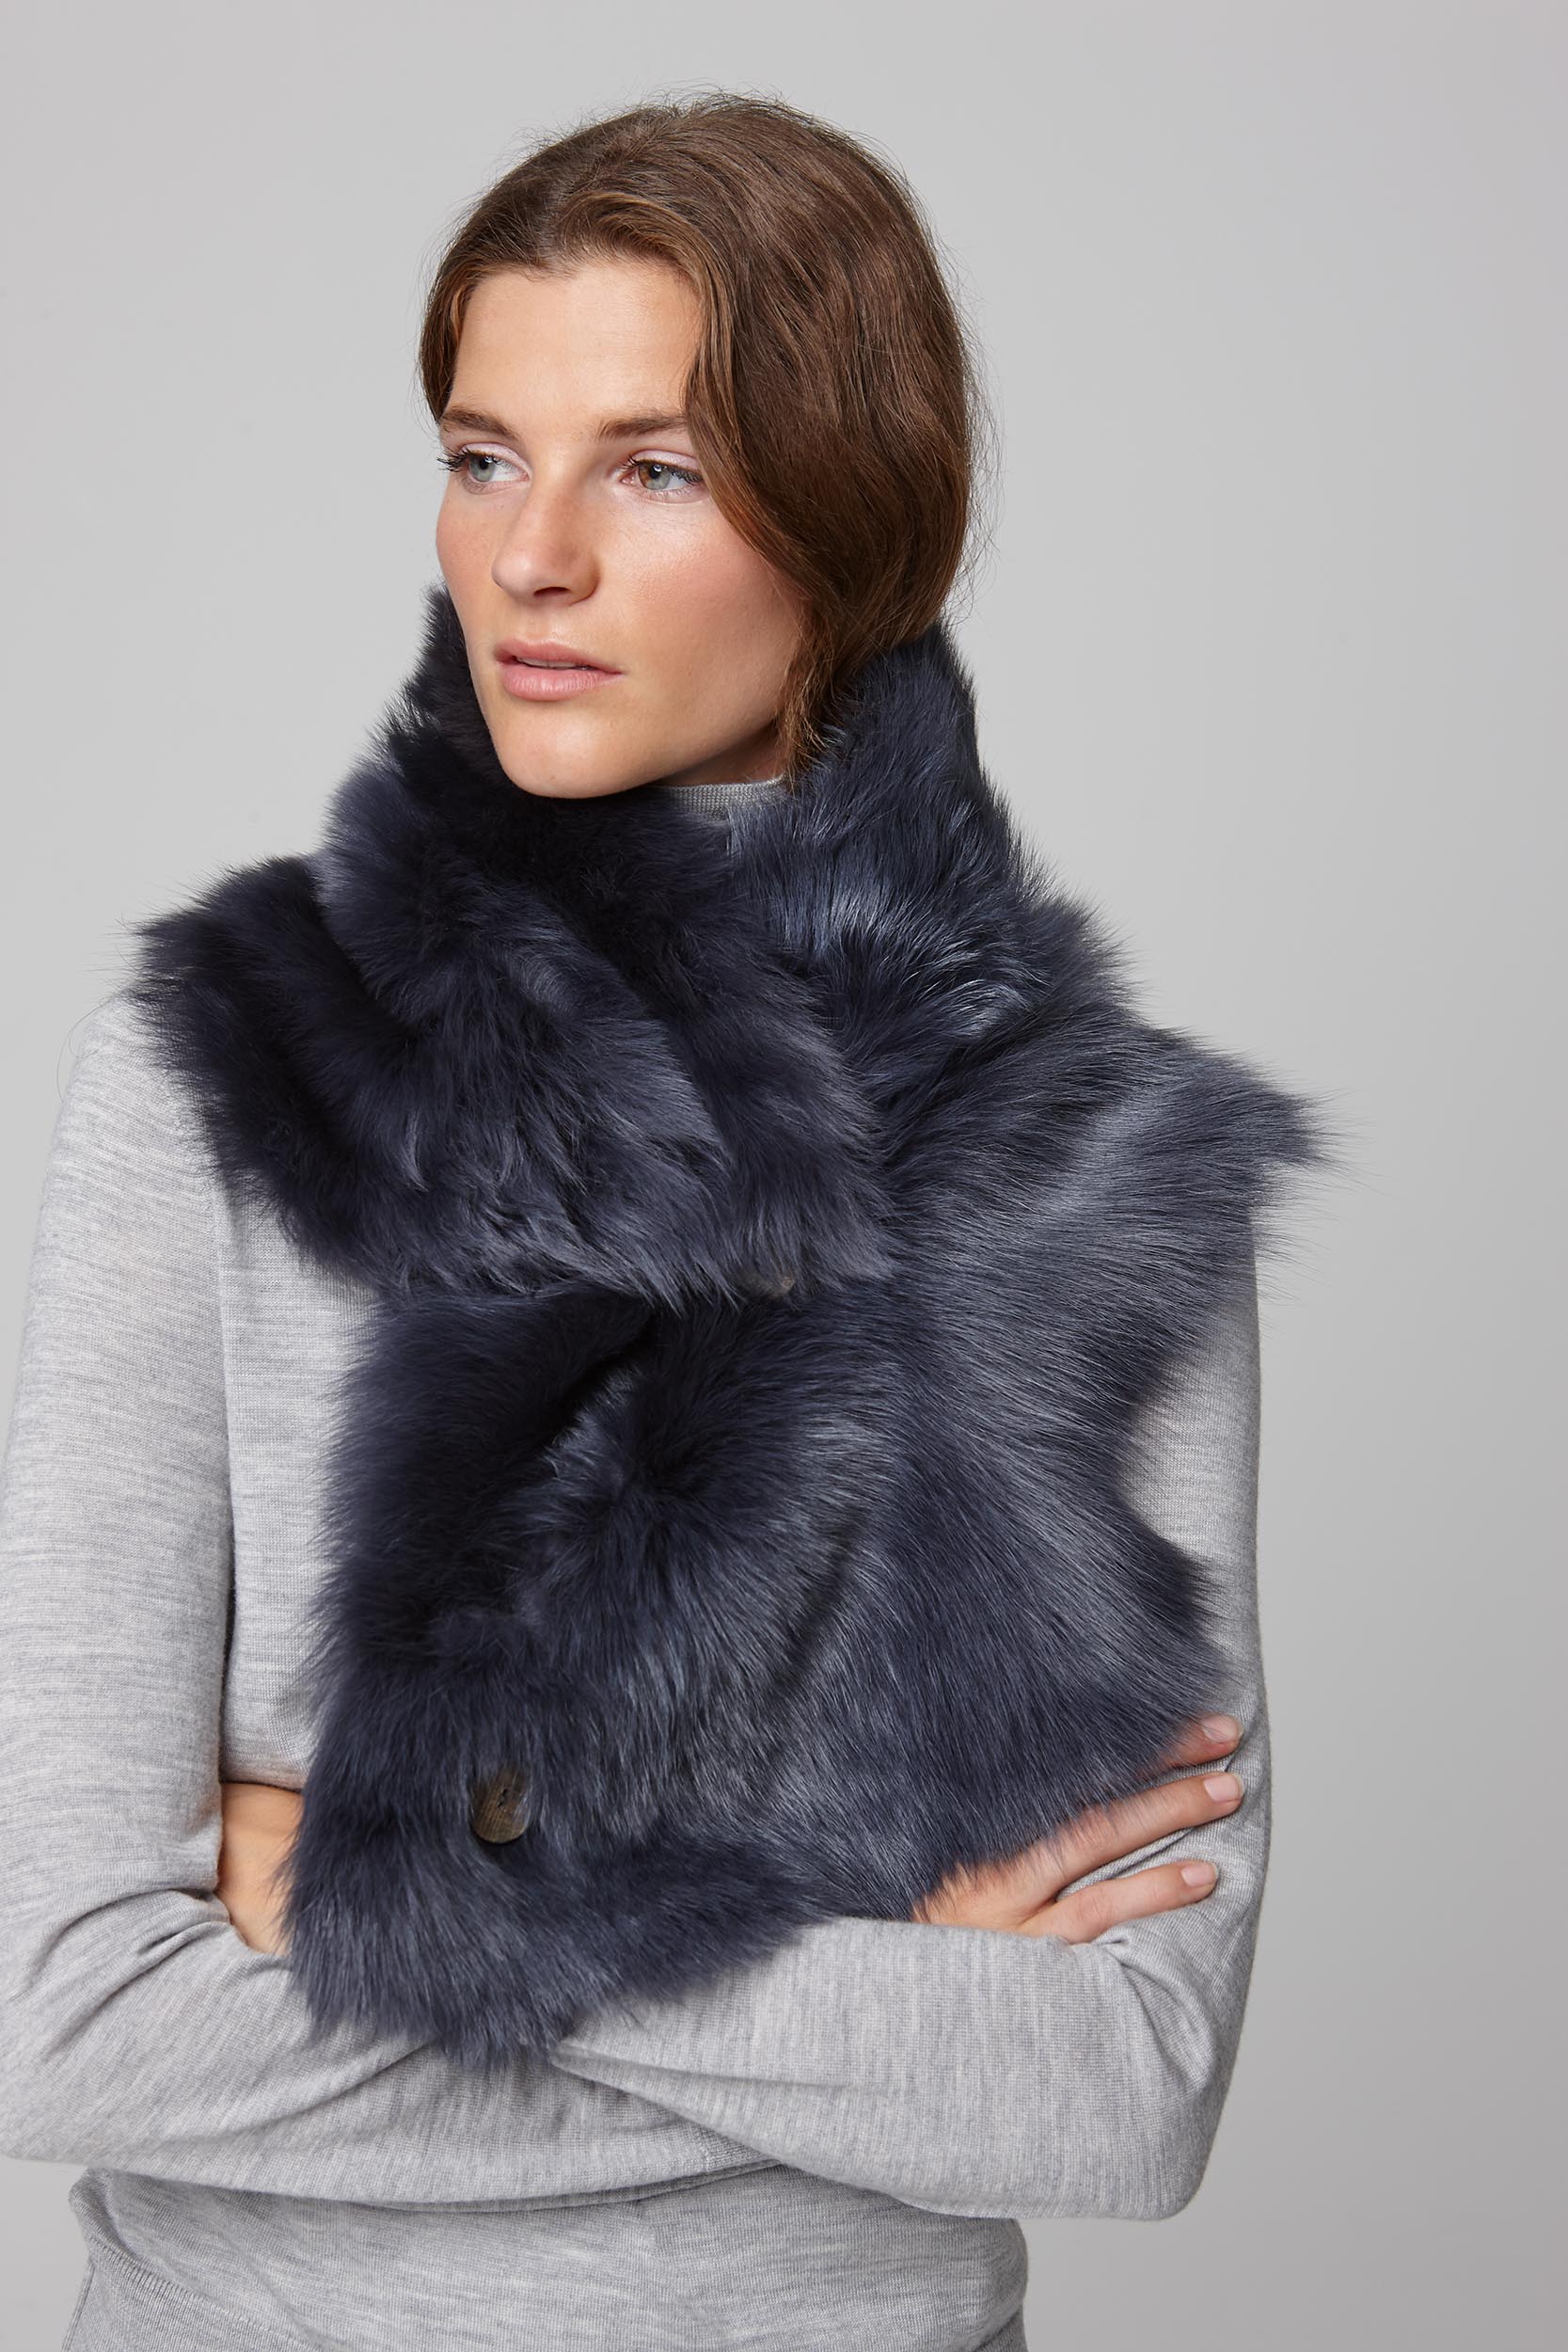 Gushlow & Cole Two Button Shearling Snood Scarf